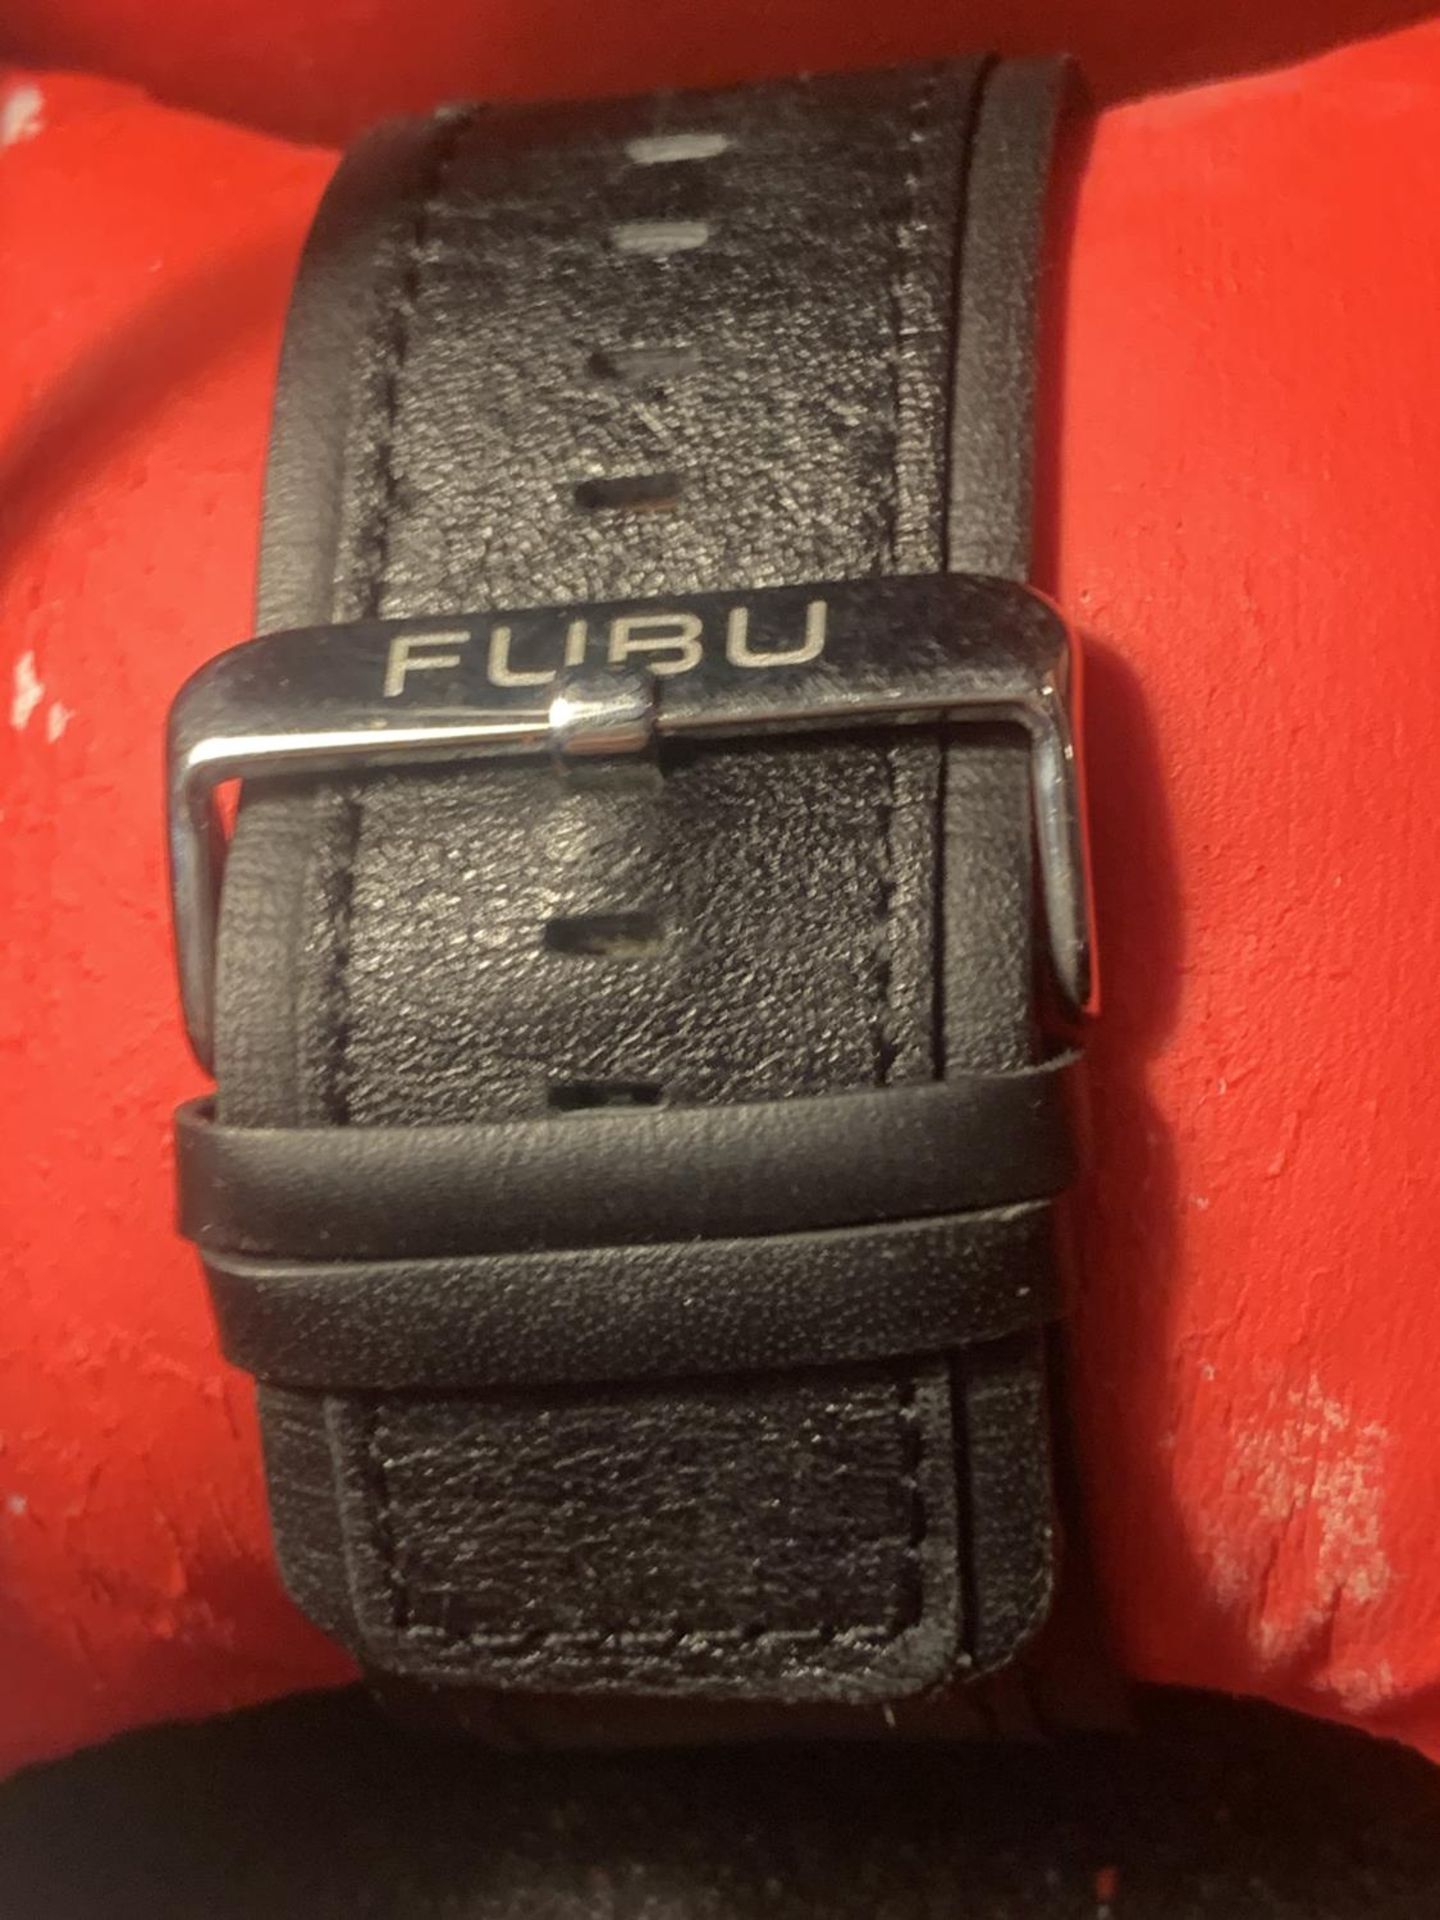 AN AS NEW AND BOXED FUBU WRISTWATCH SEEN WORKING BUT NO WARRANTY - Image 3 of 4